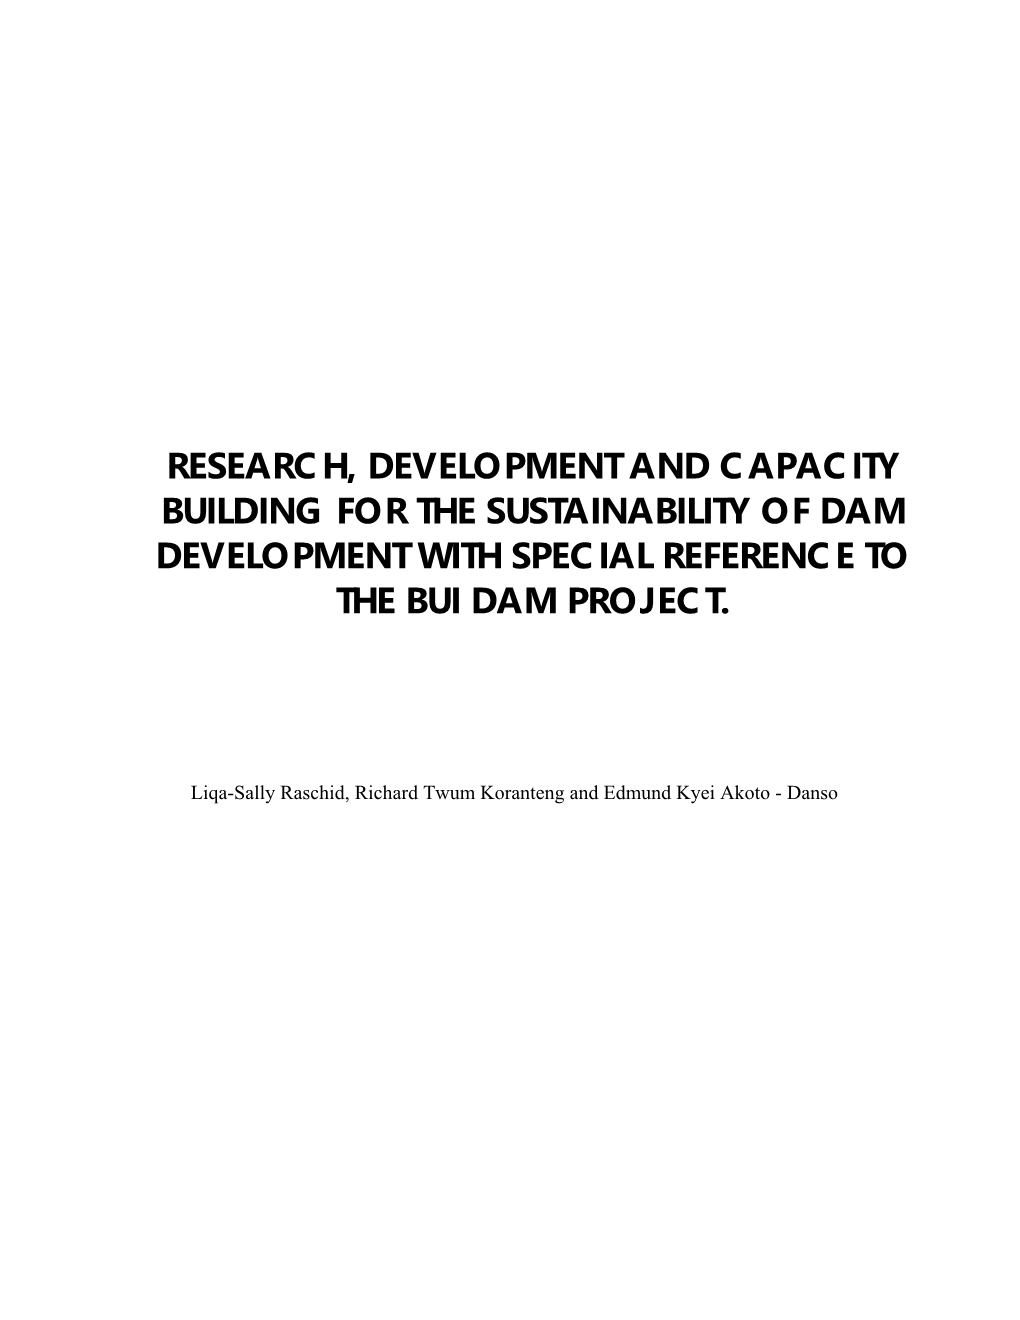 Research, Development and Capacity Building for the Sustainability of Dam Development with Special Reference to the Bui Dam Project